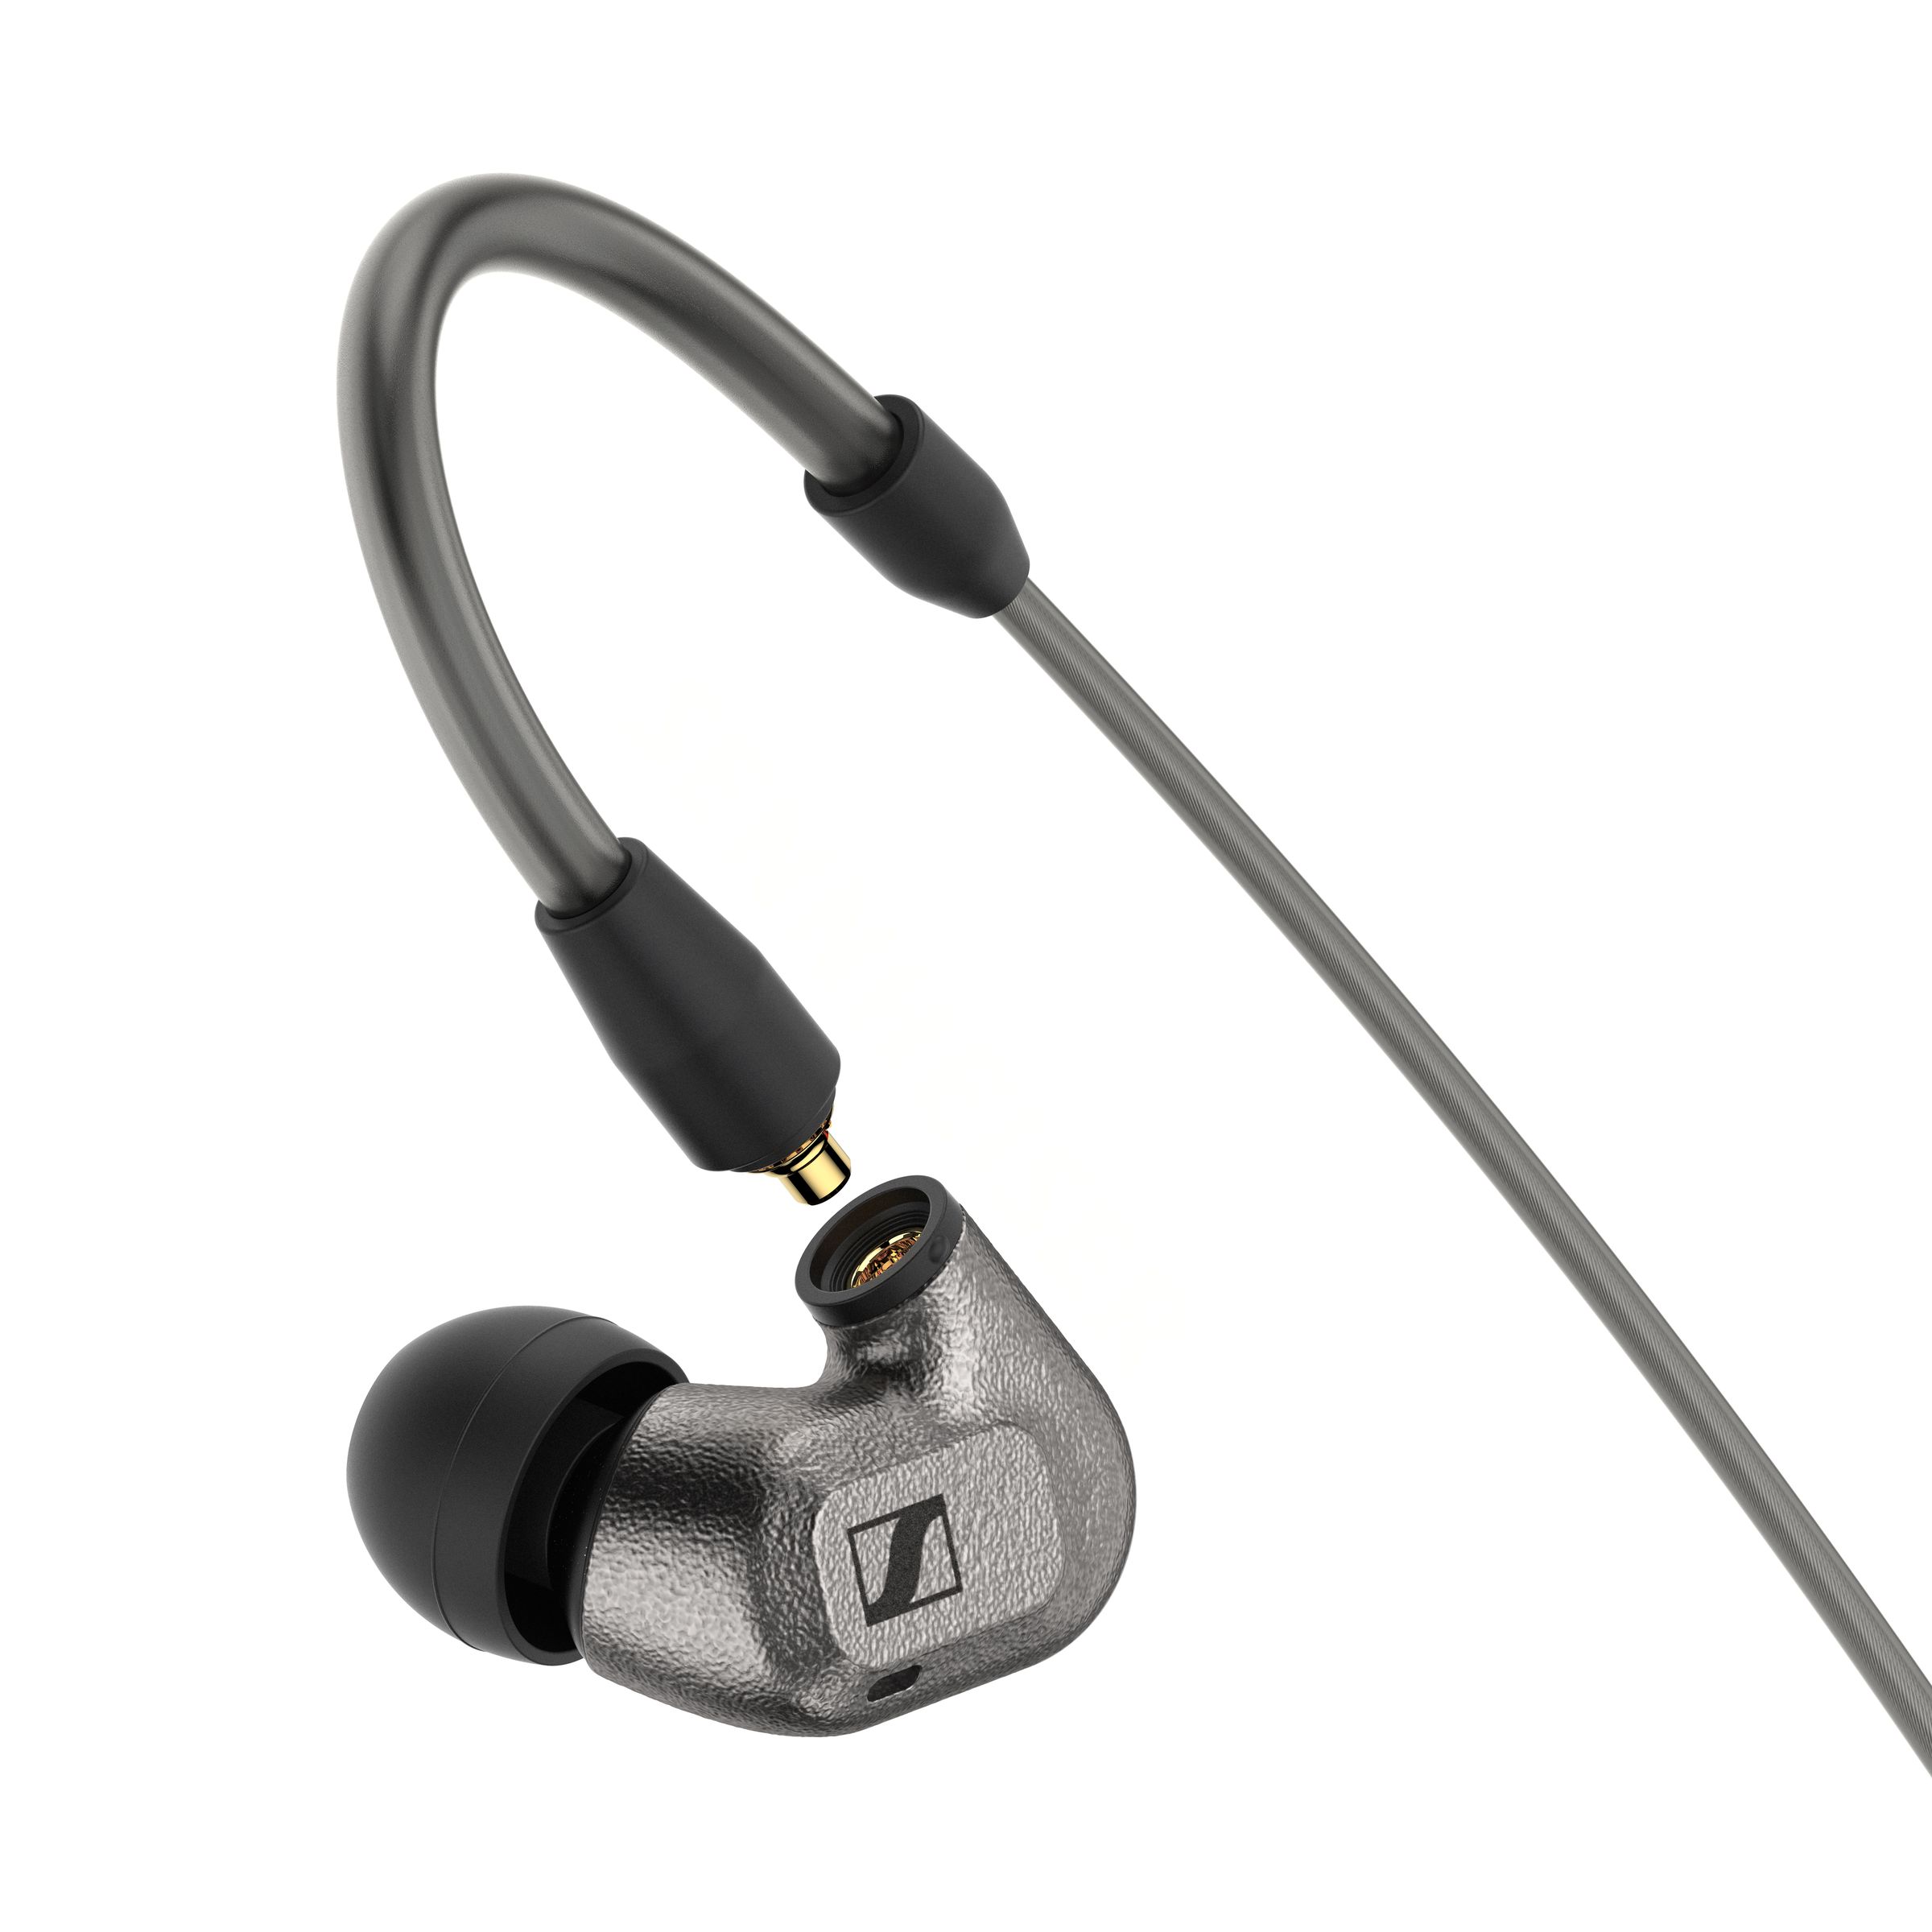 The IE 600 disconnects at the earbud for different inputs.